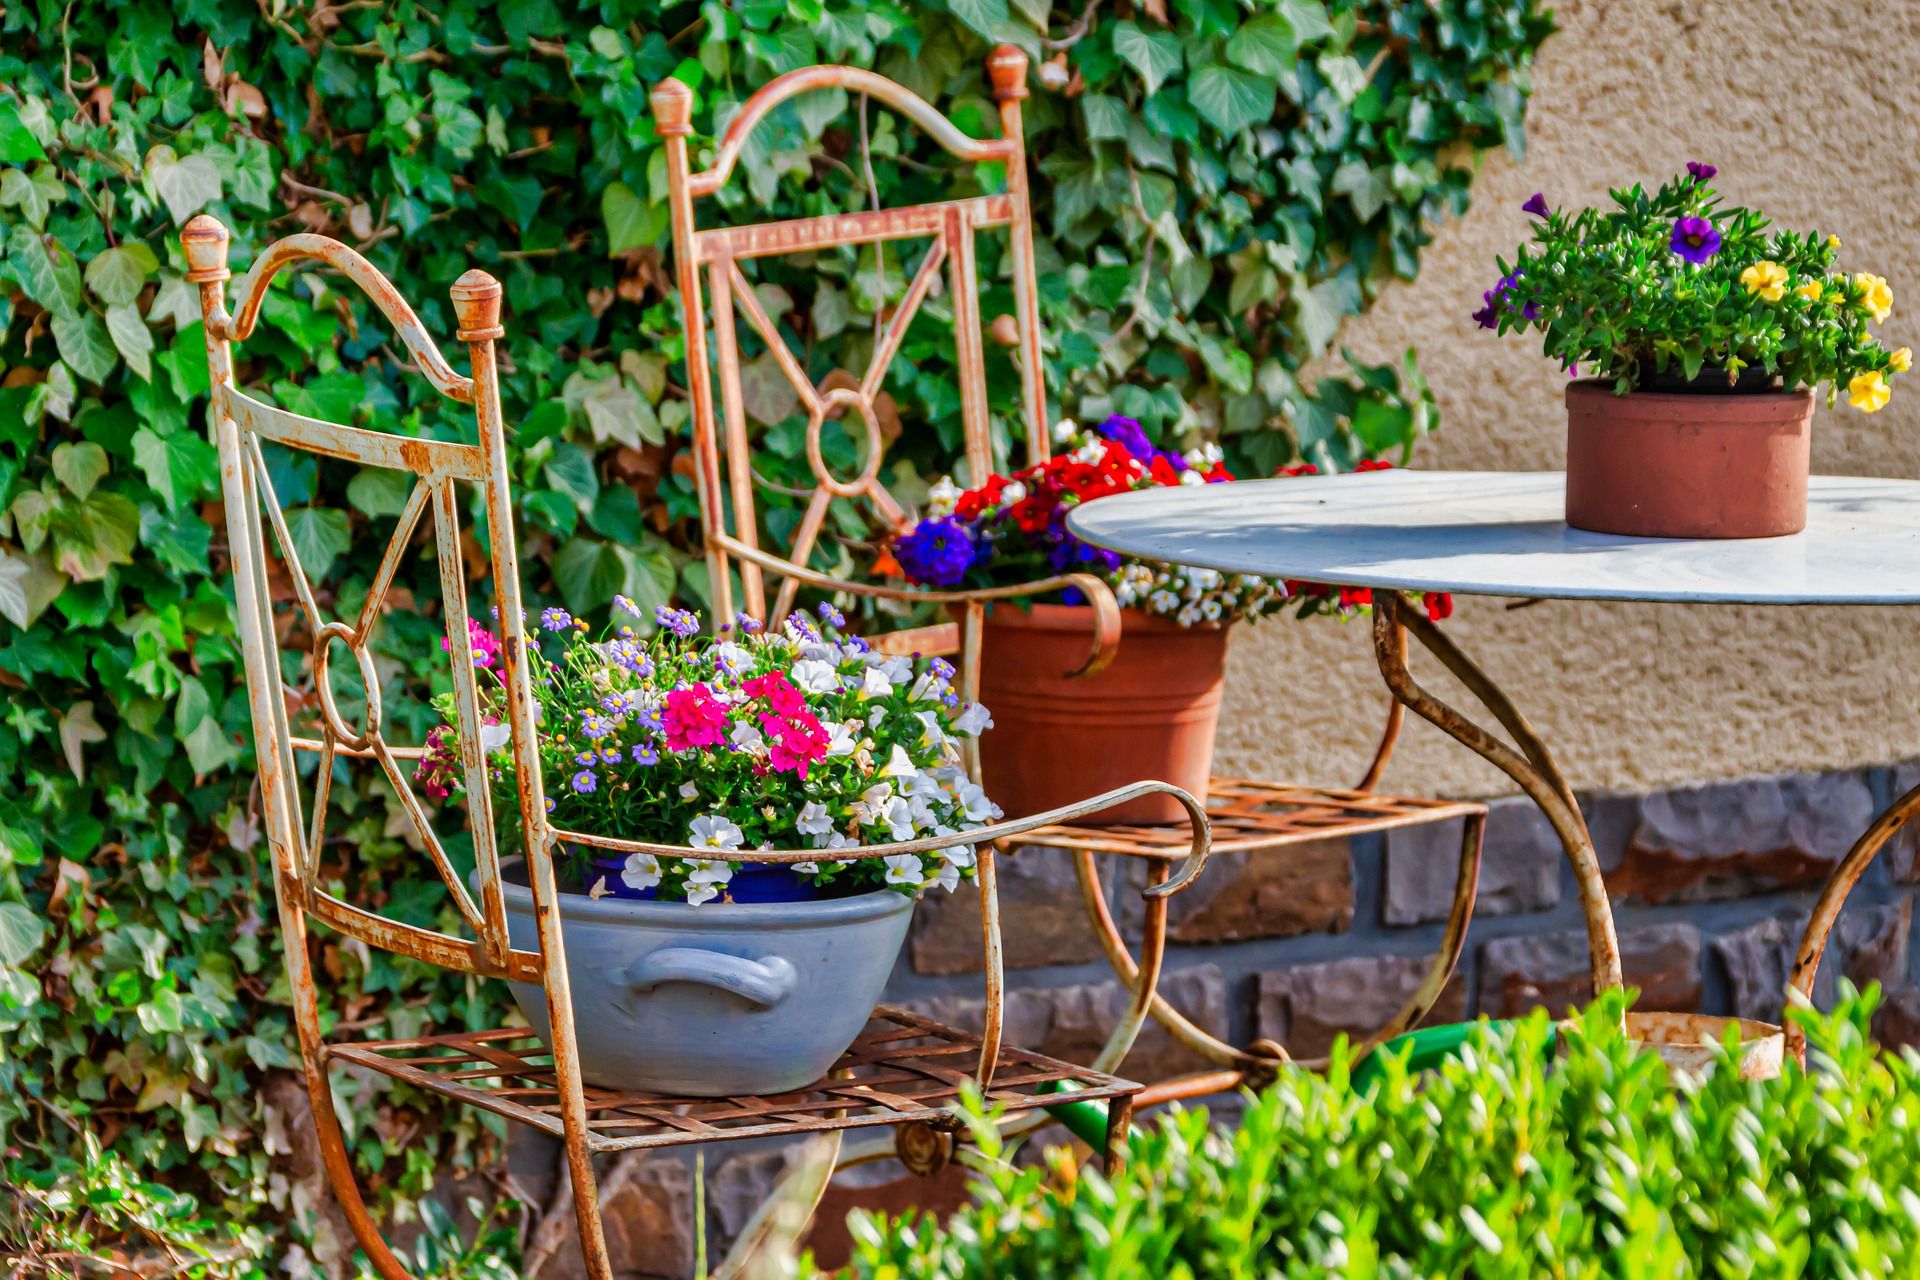 Top tips for getting your garden ready for entertaining again